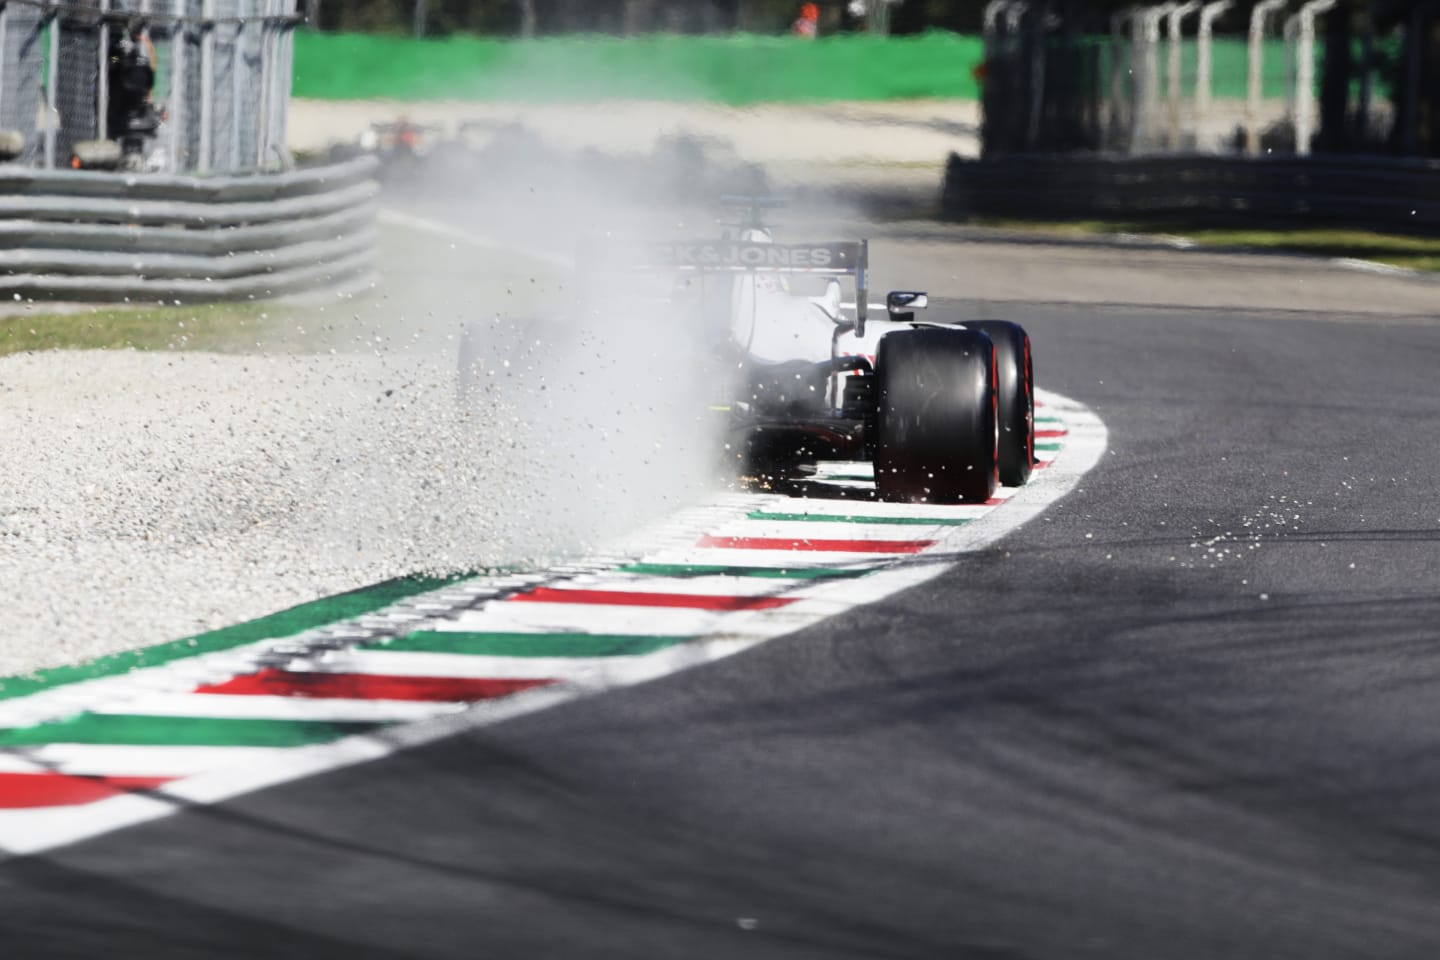 MONZA, ITALY - SEPTEMBER 05: Romain Grosjean of France driving the (8) Haas F1 Team VF-20 Ferrari during qualifying for the F1 Grand Prix of Italy at Autodromo di Monza on September 05, 2020 in Monza, Italy. (Photo by Luca Bruno - Pool/Getty Images)